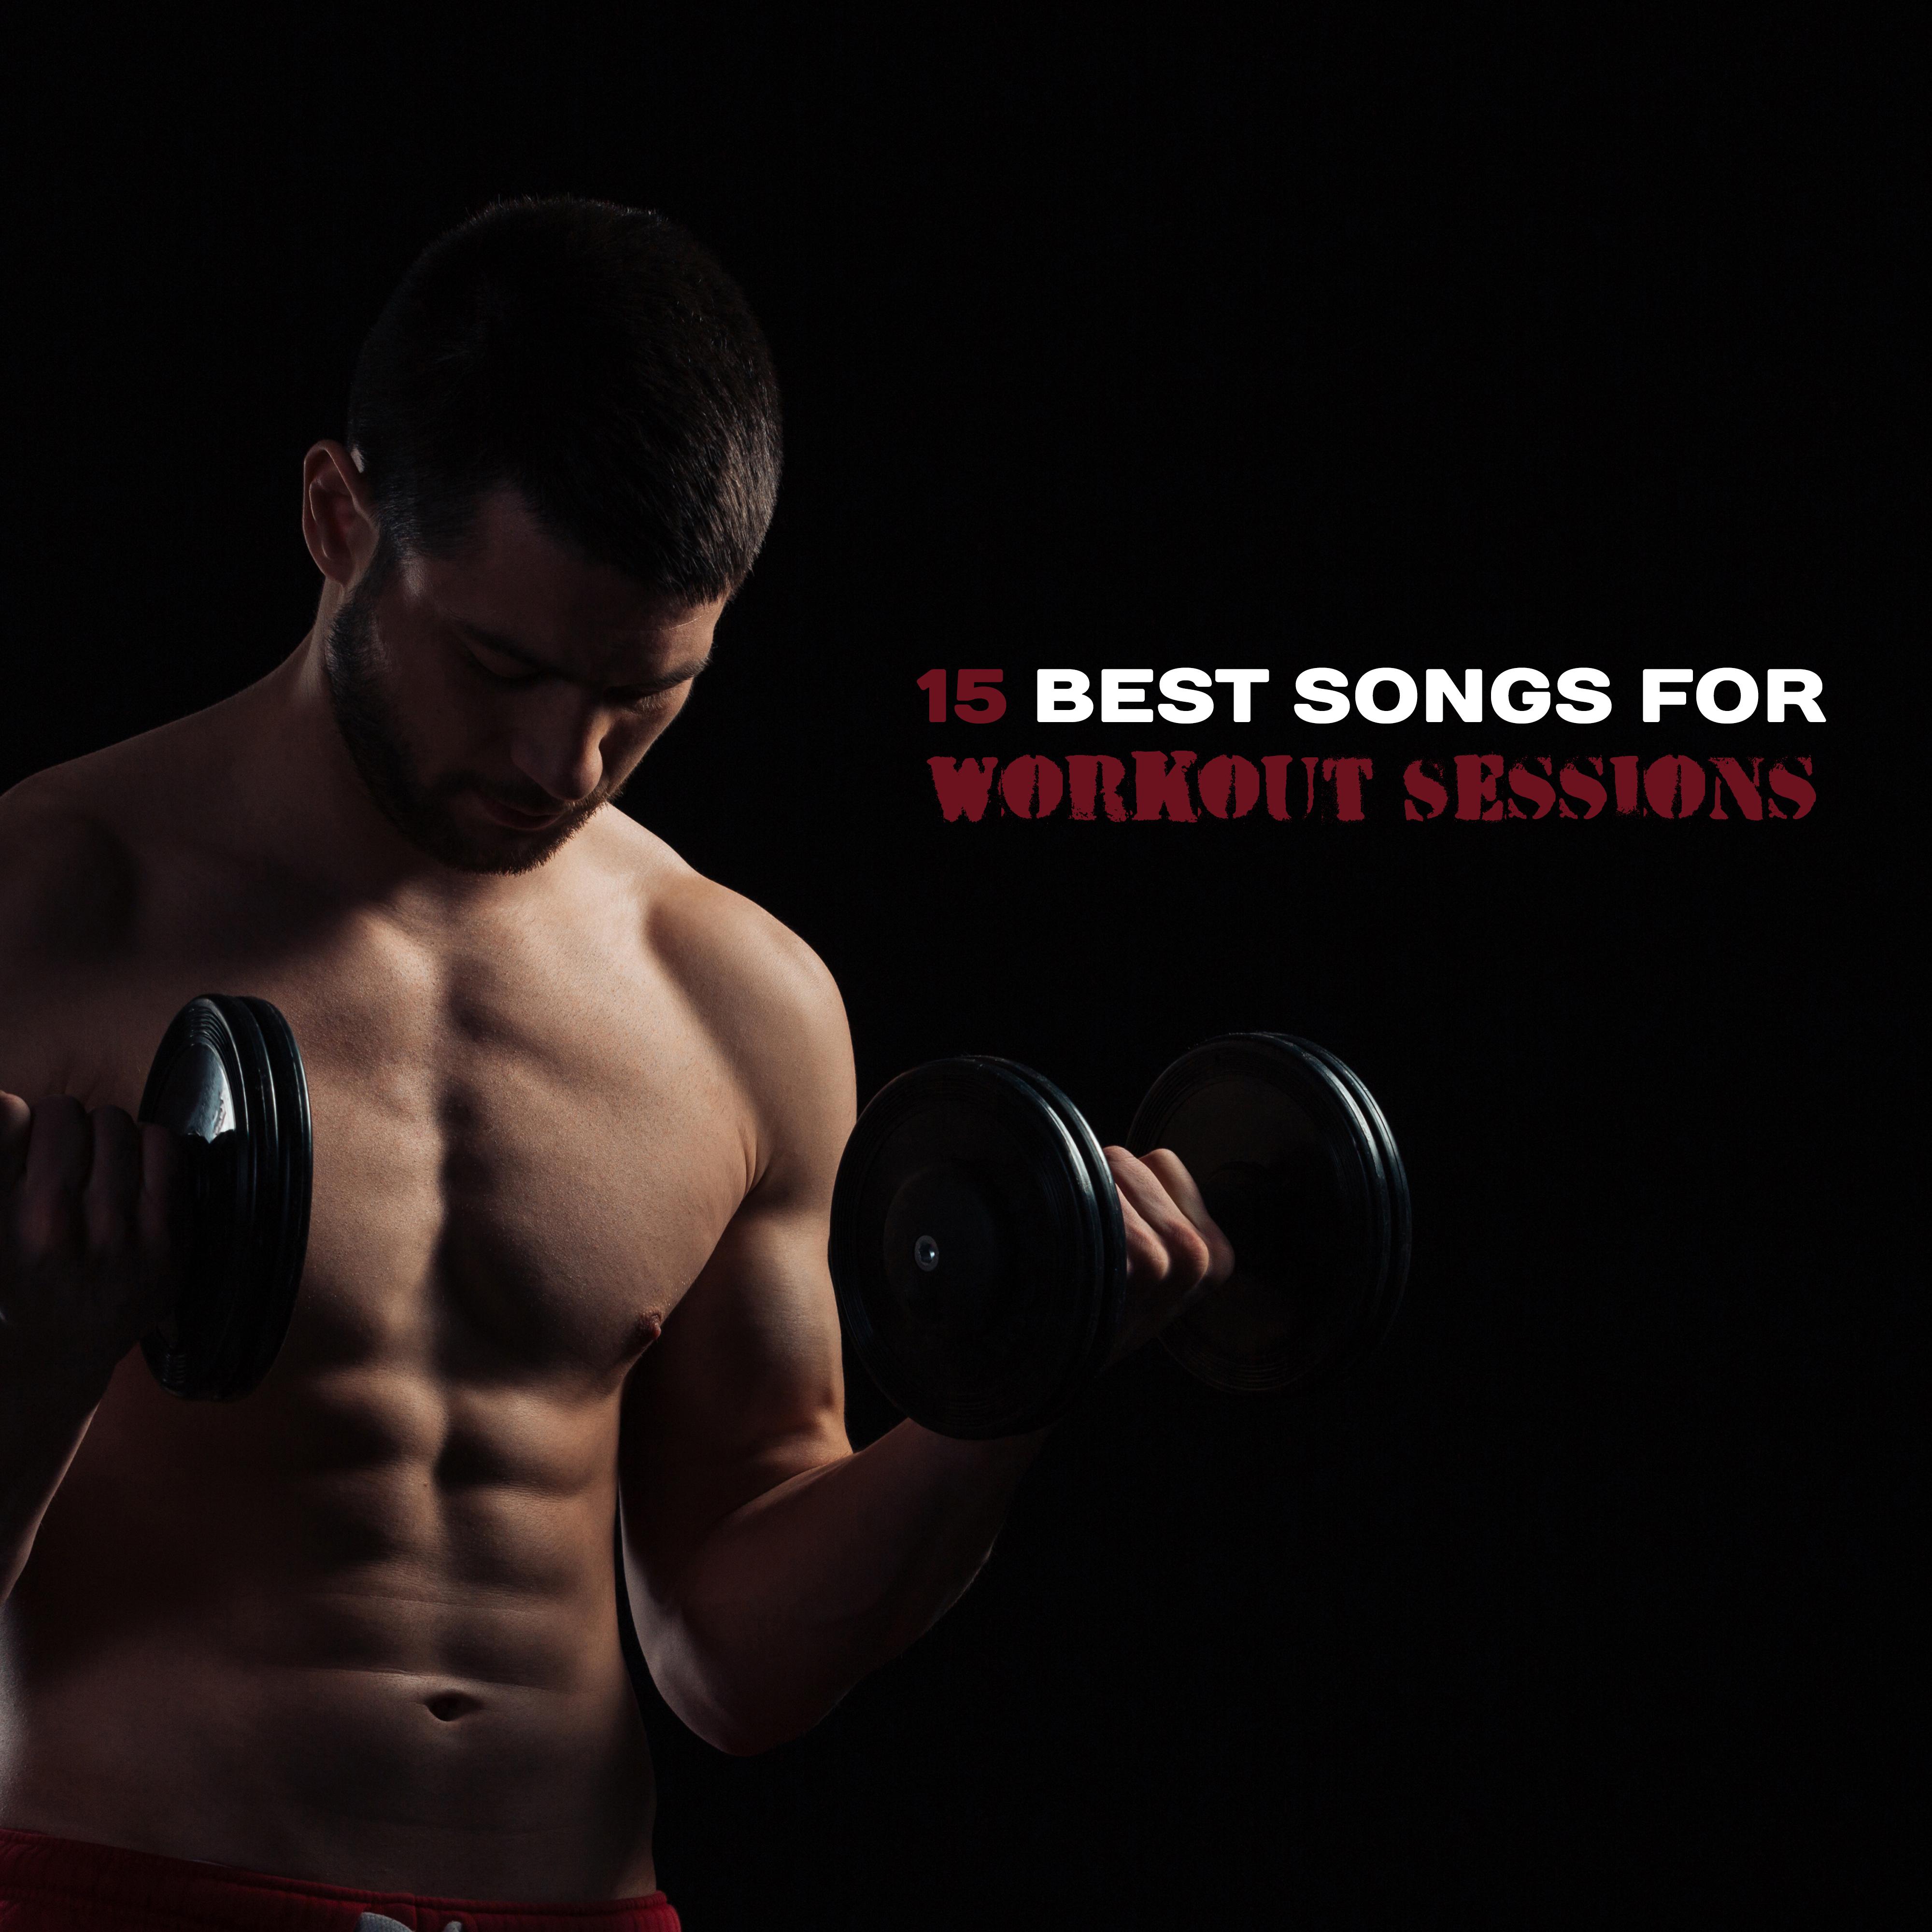 15 Best Songs for Workout Sessions  Music for Stretching Out, Pilates Workout, Training Yoga, Relax for Body